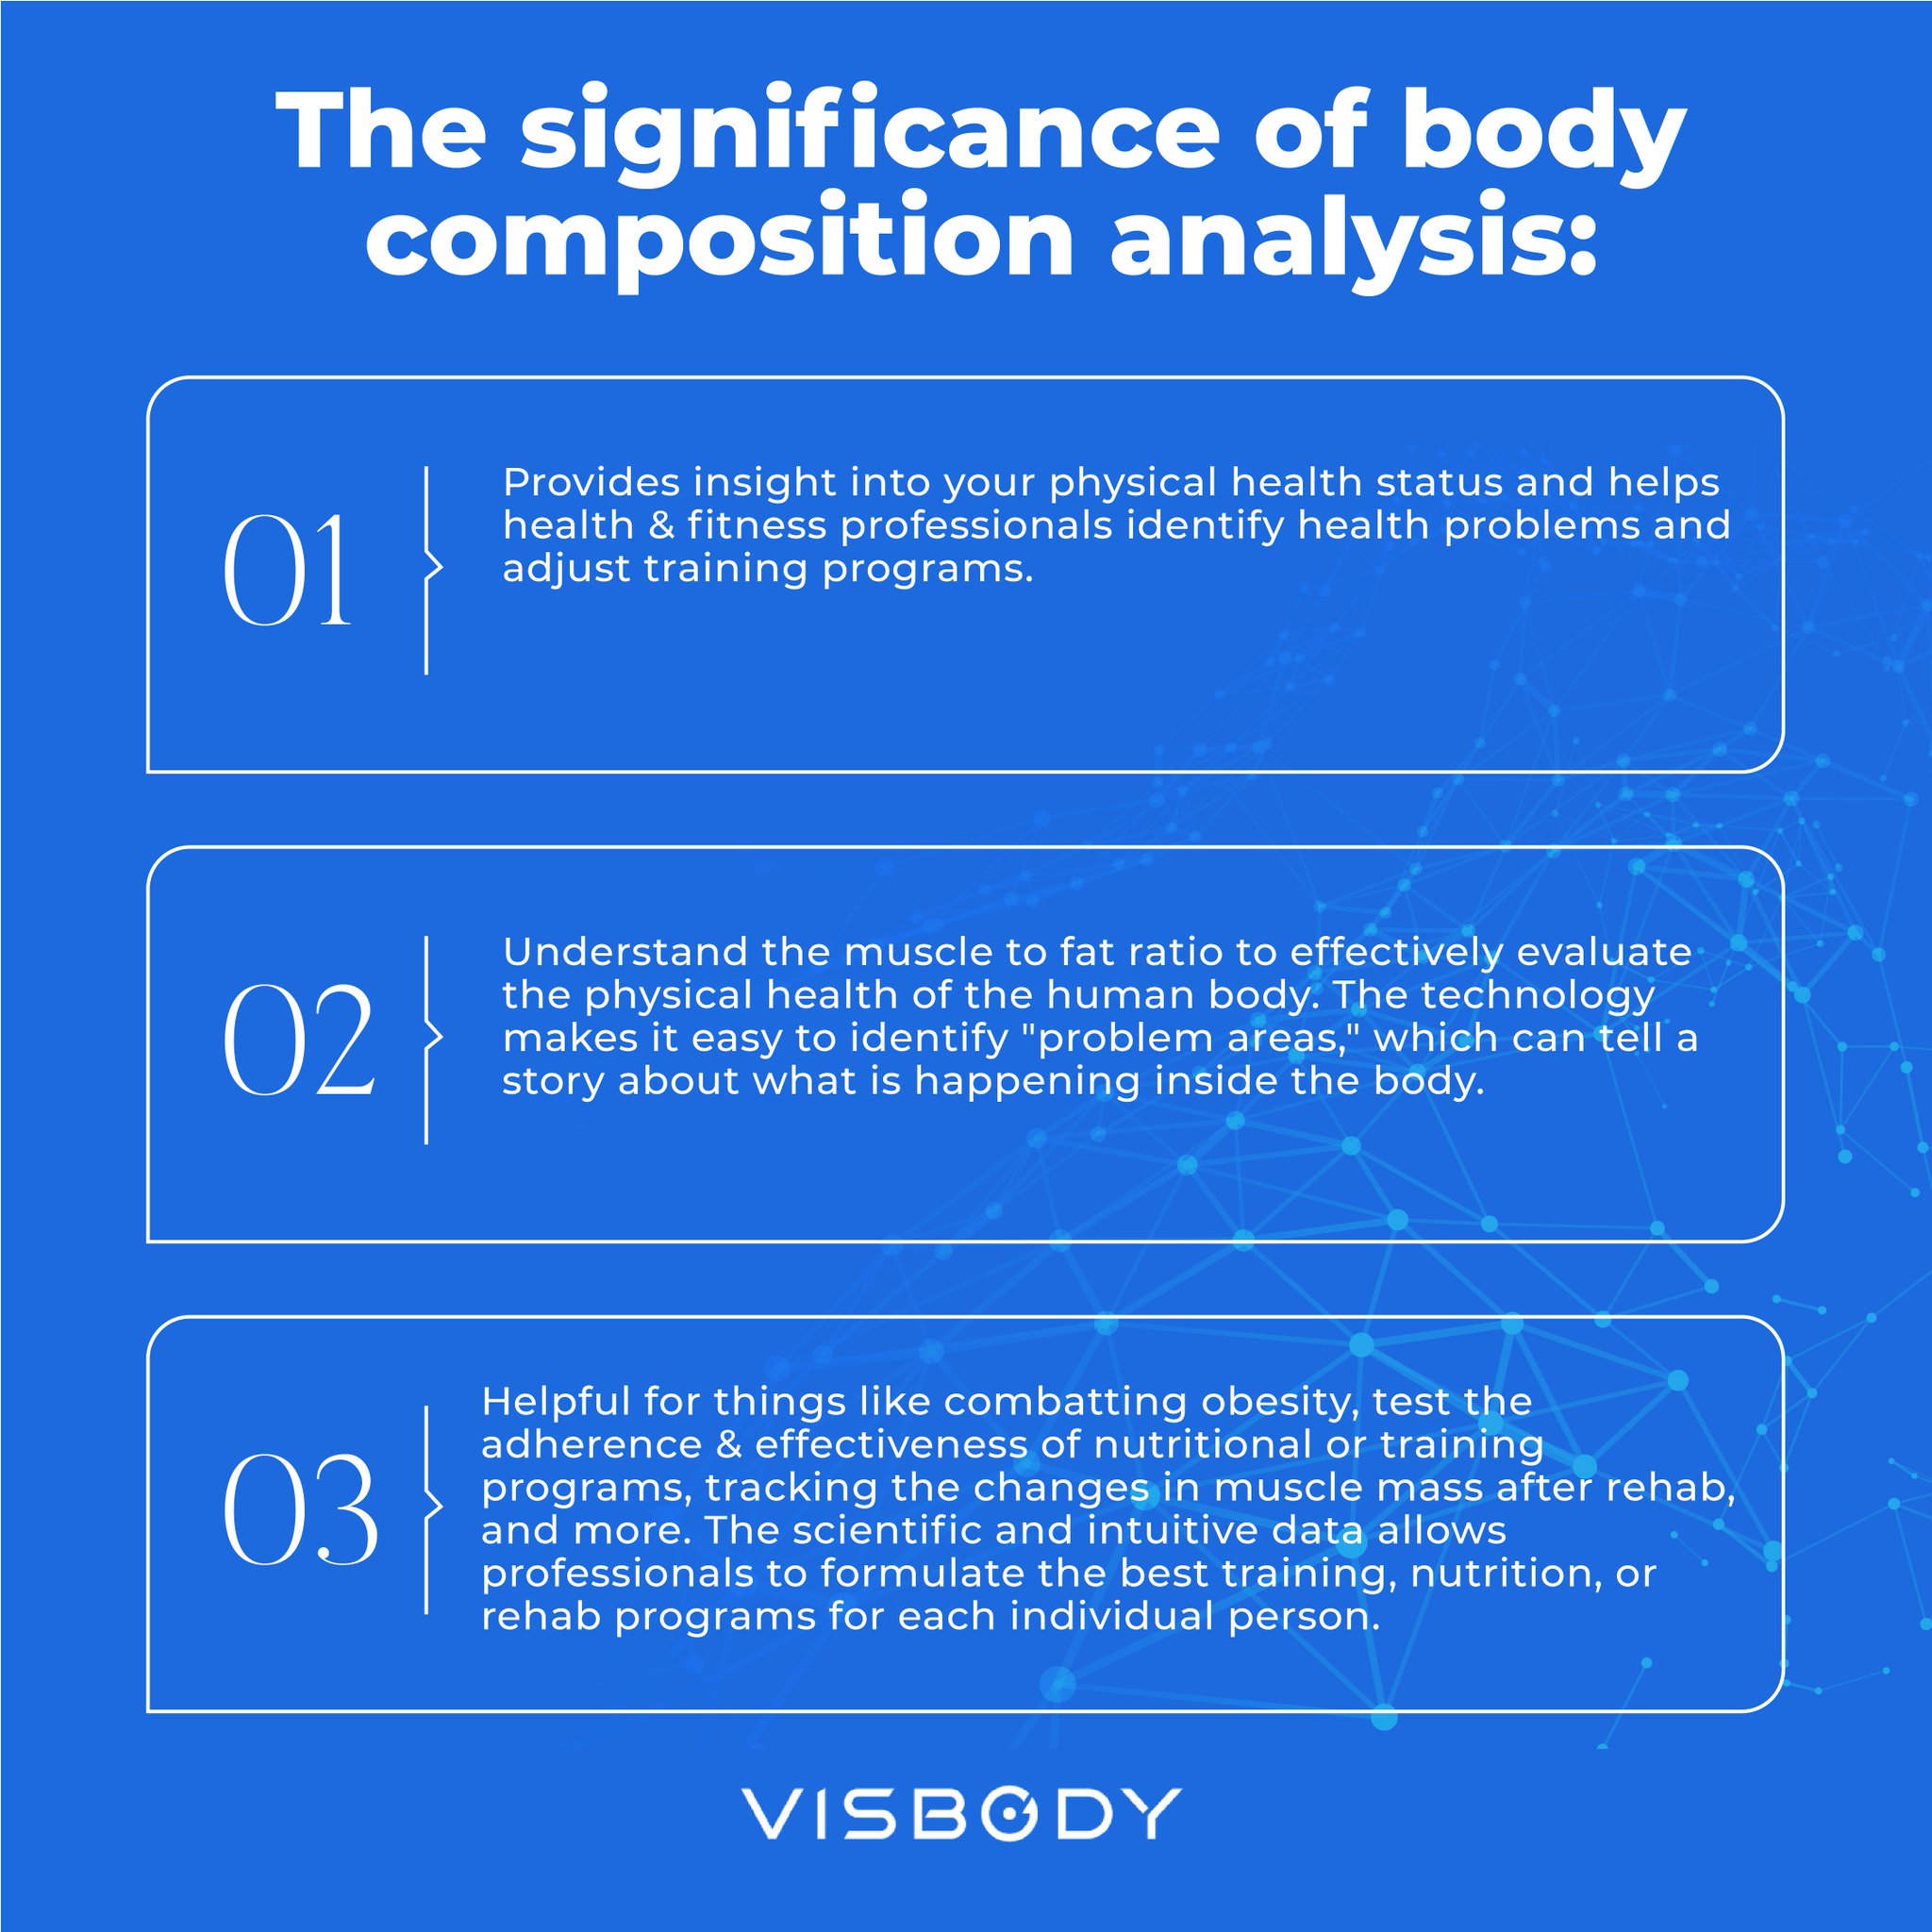 How To Effectively Track Changes in Body Composition?